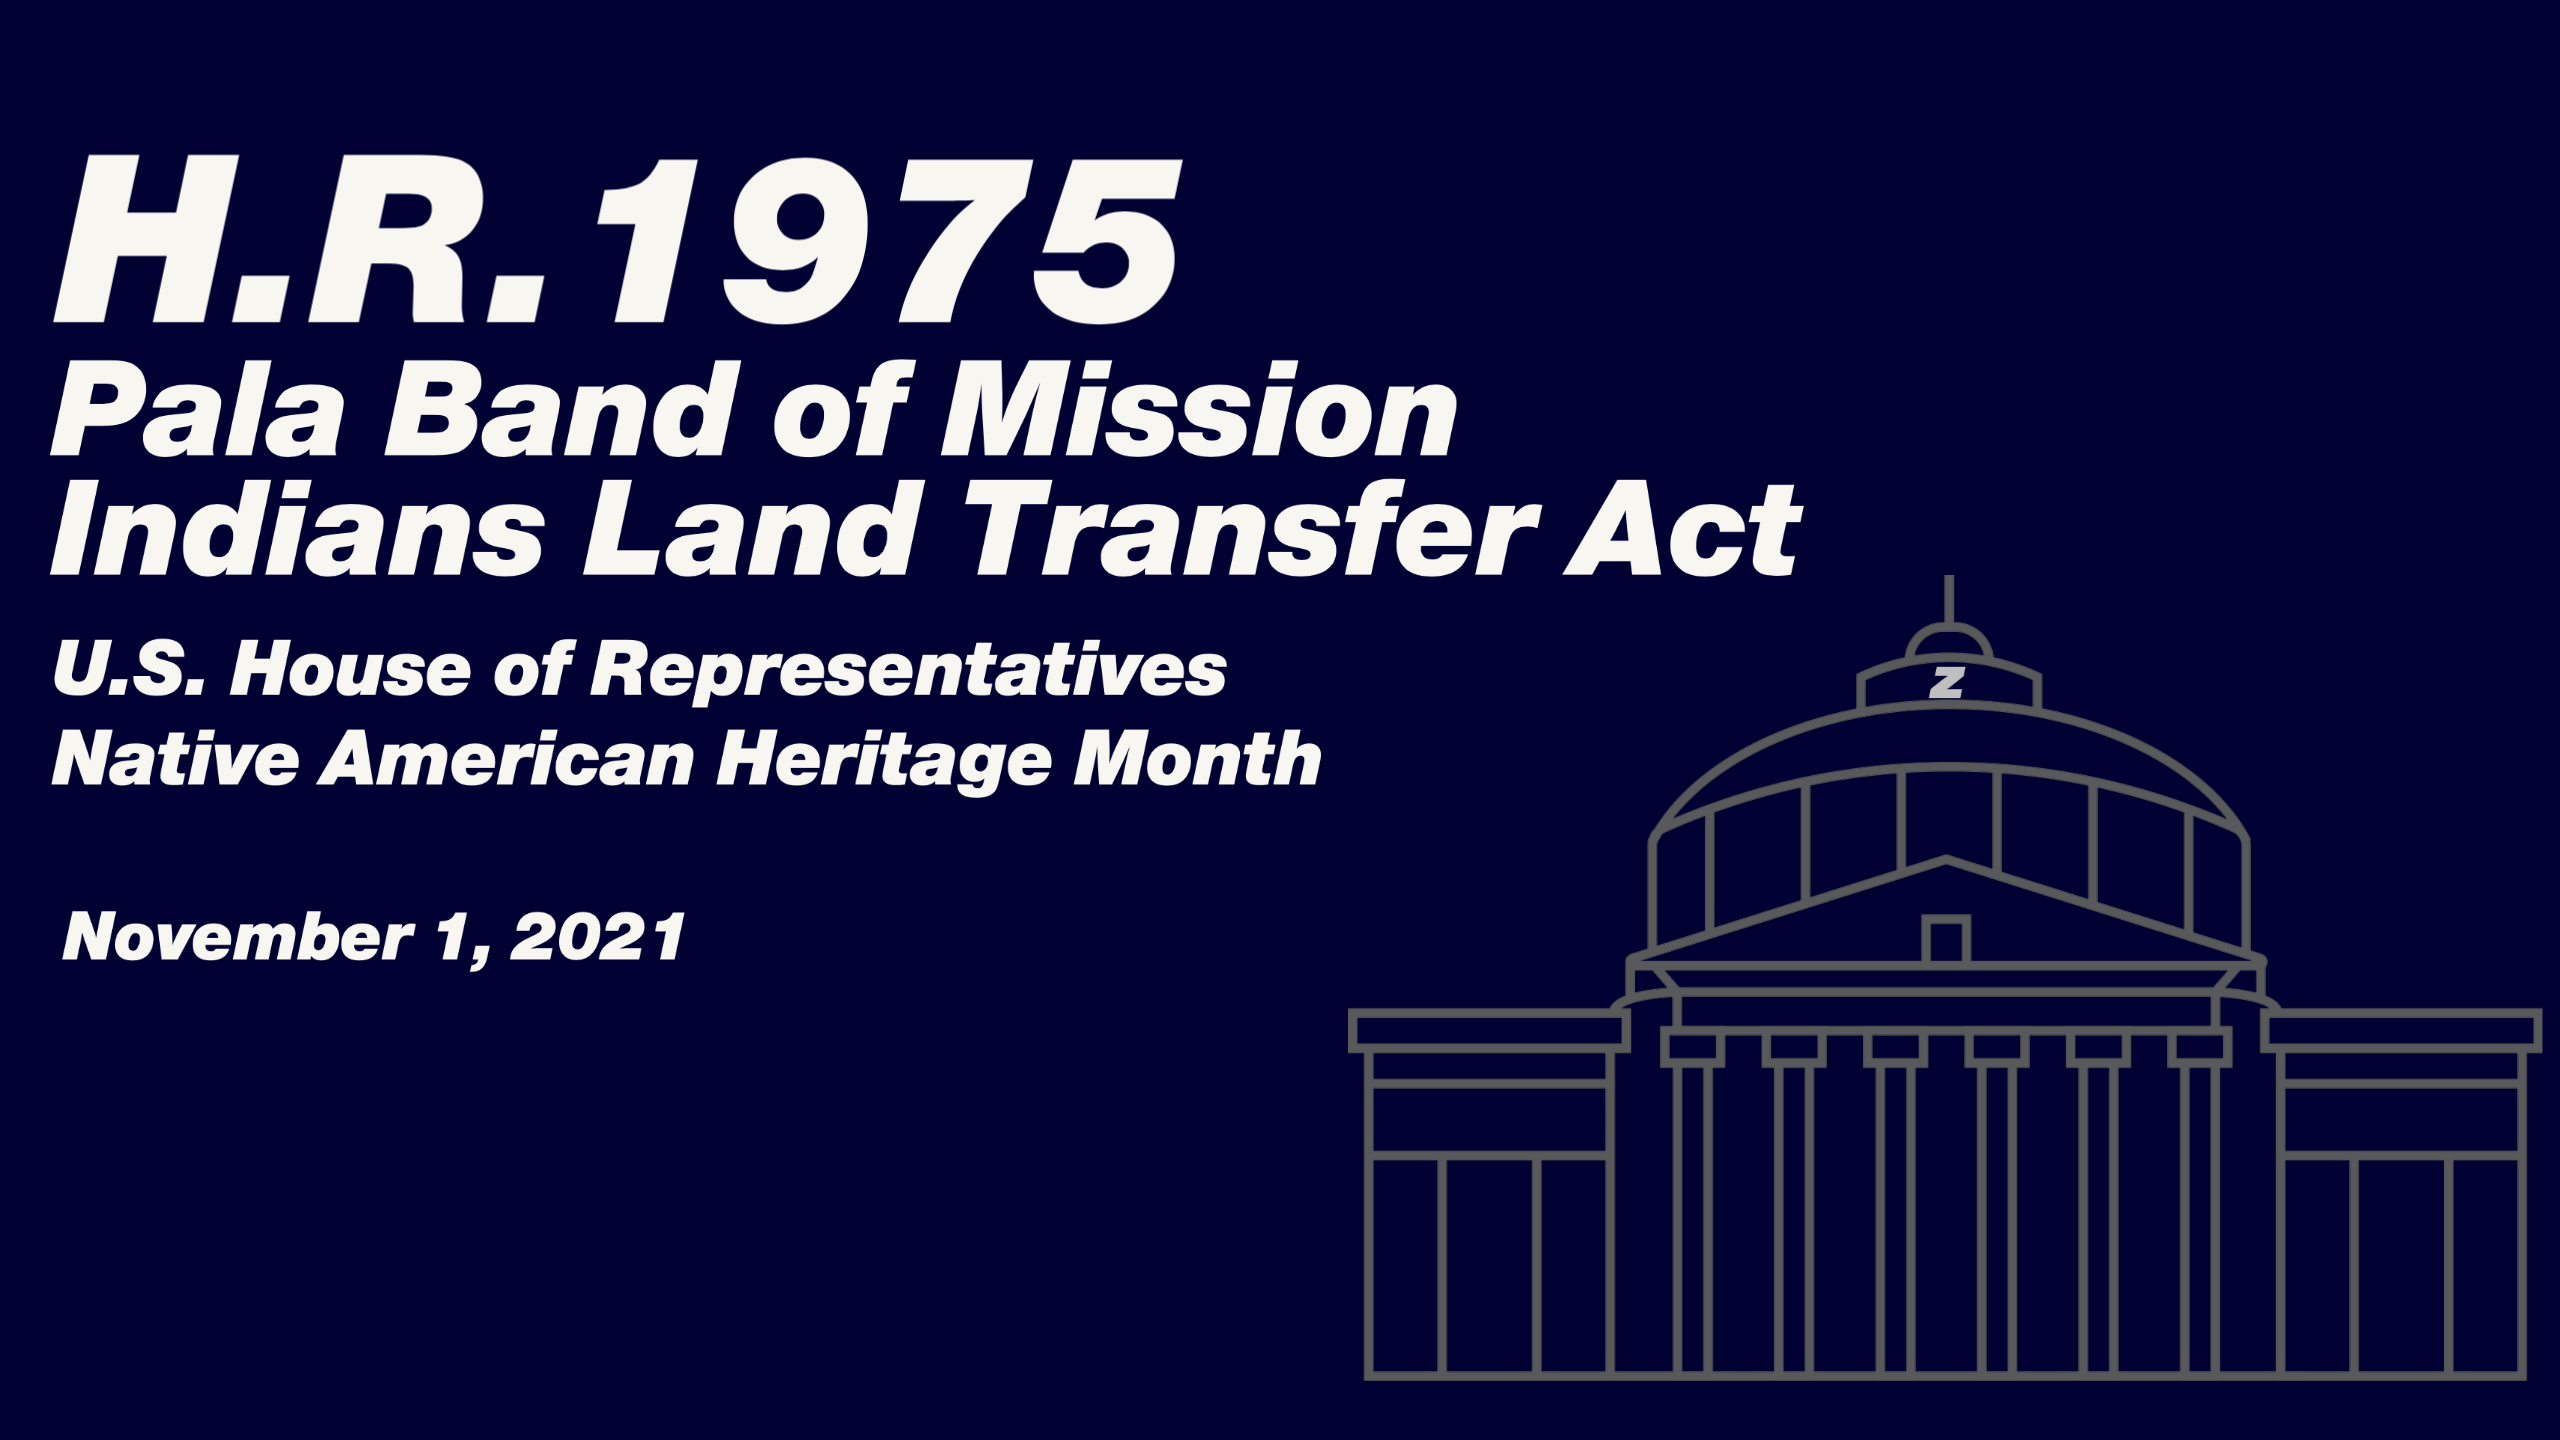 H.R.1975 - Pala Band of Mission Indians Land Transfer Act